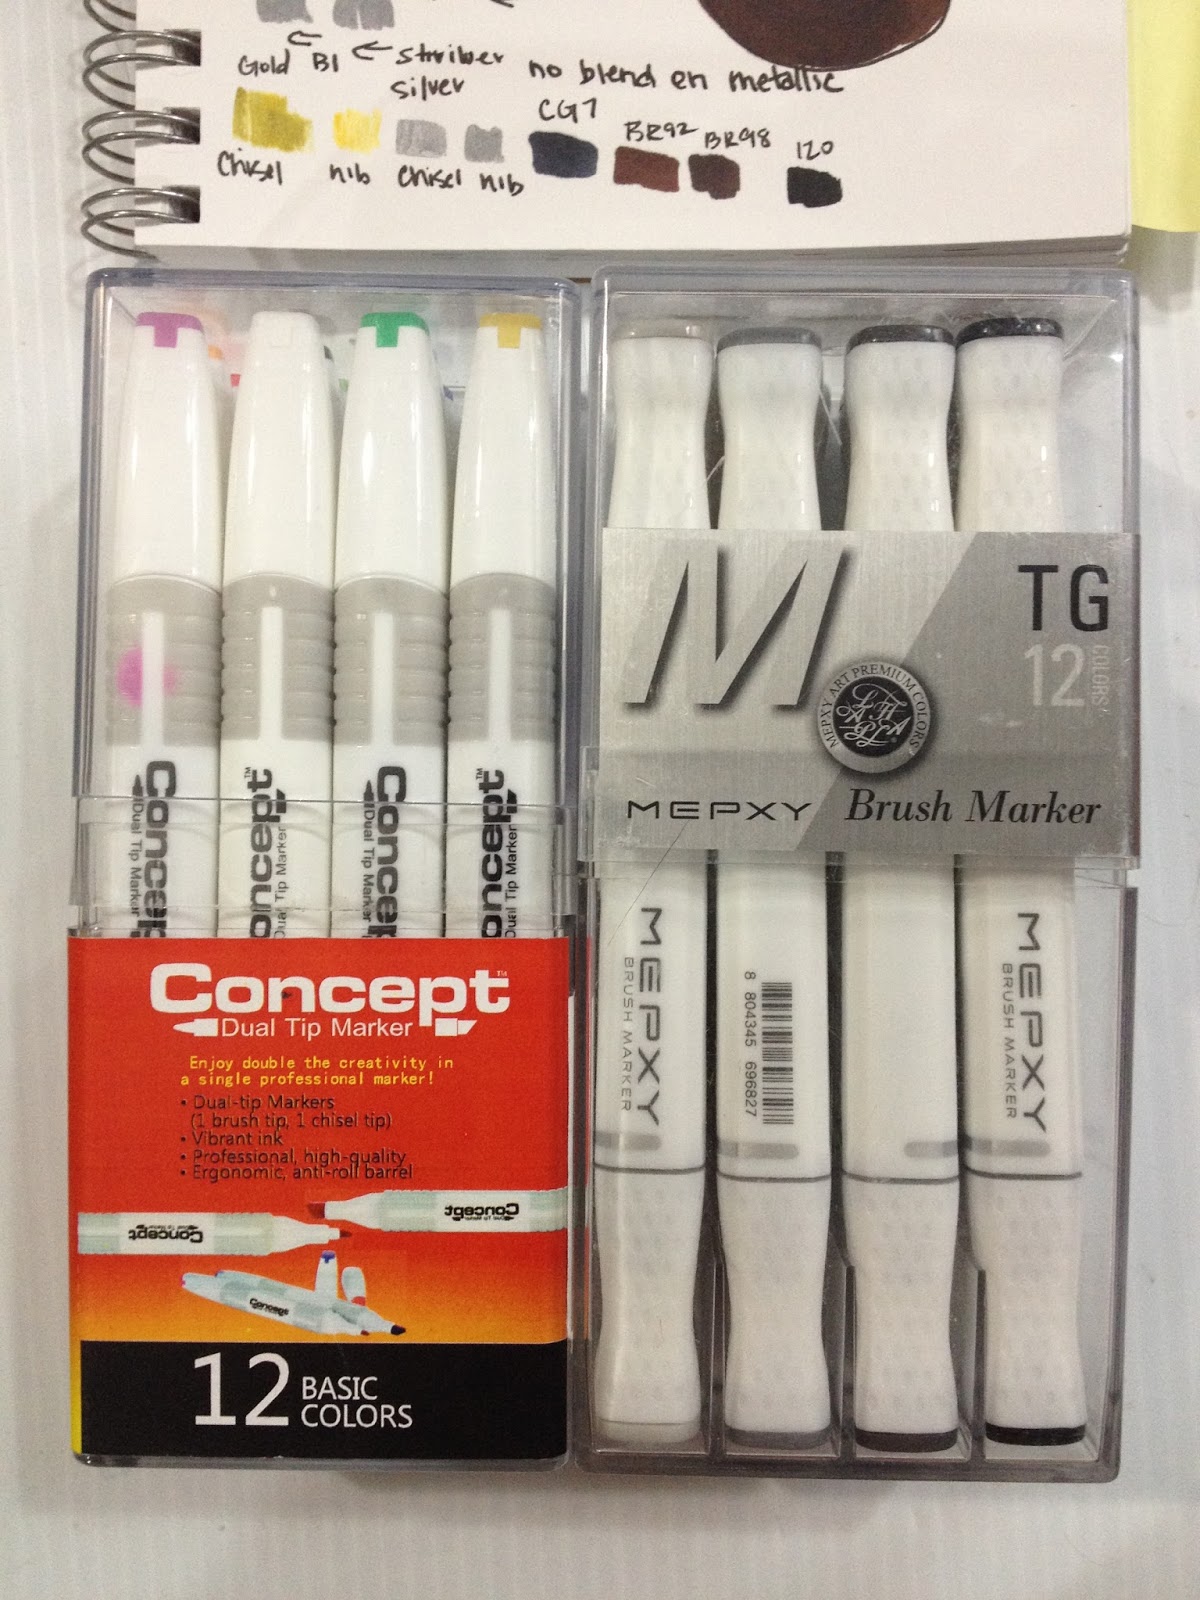 Dual Tip Art Markers & Sets, 4 in 1 Markers by Concept